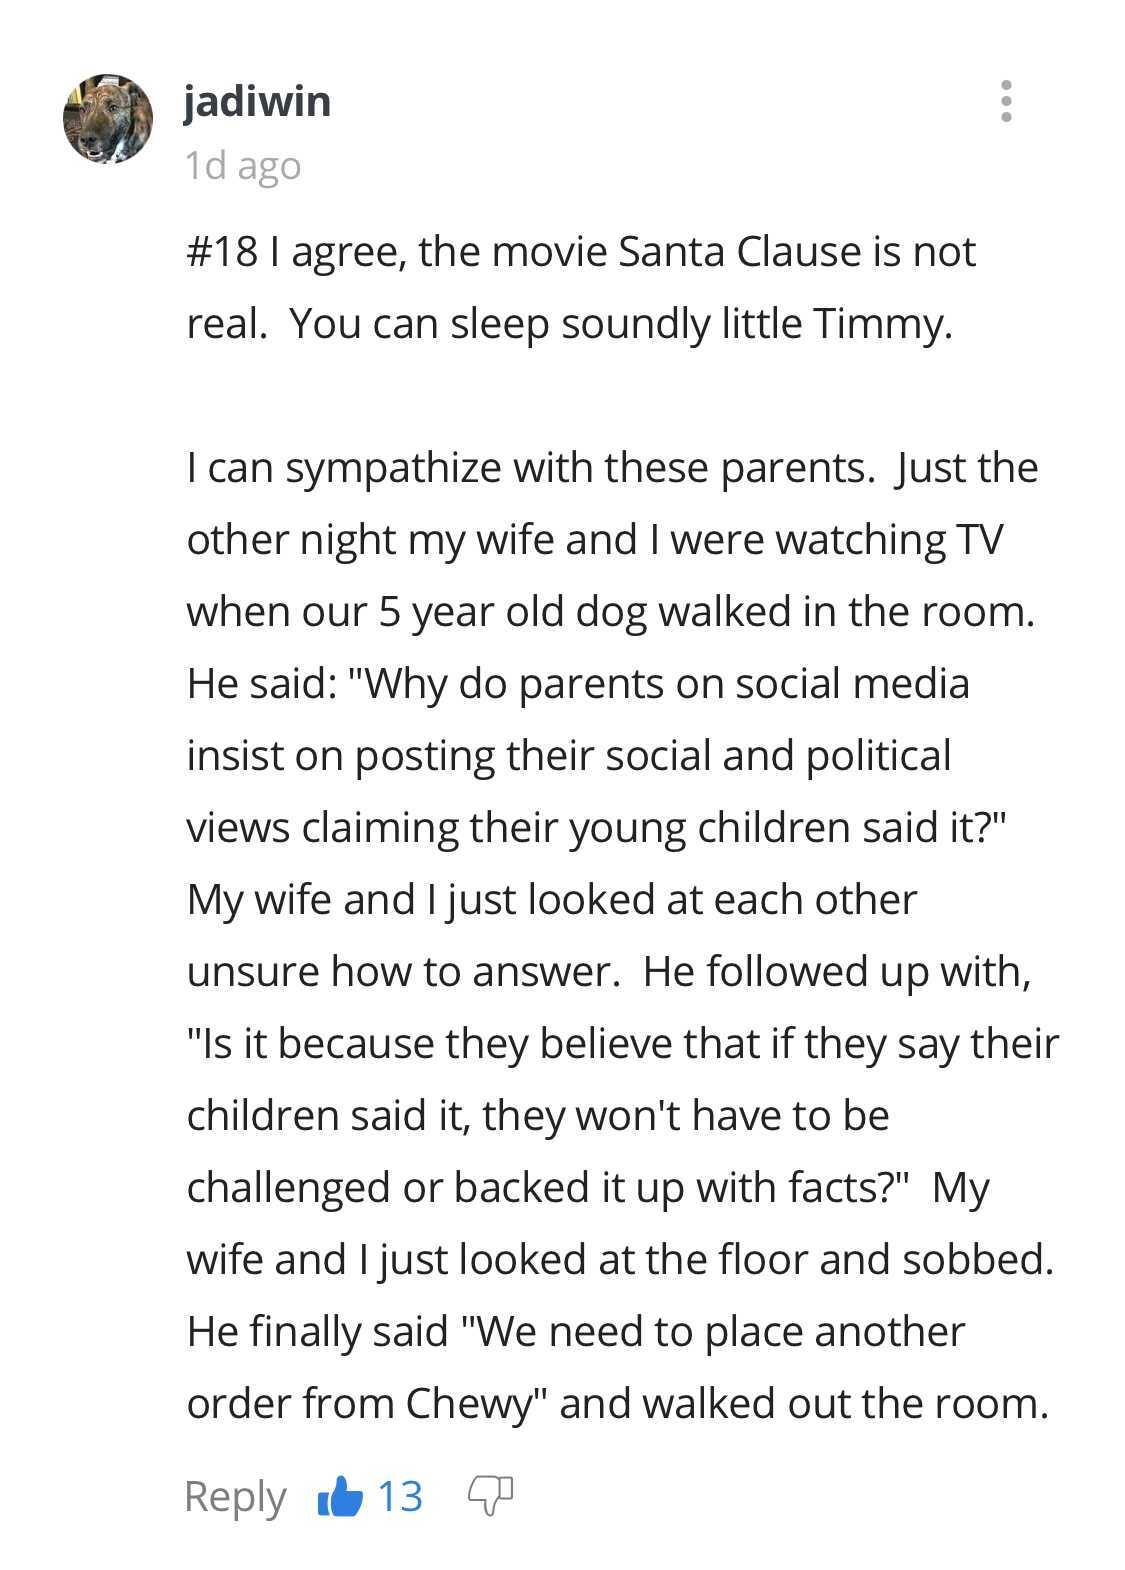 document - jadiwin 1d ago I agree, the movie Santa Clause is not real. You can sleep soundly little Timmy. I can sympathize with these parents. Just the other night my wife and I were watching Tv when our 5 year old dog walked in the room. He said "Why do